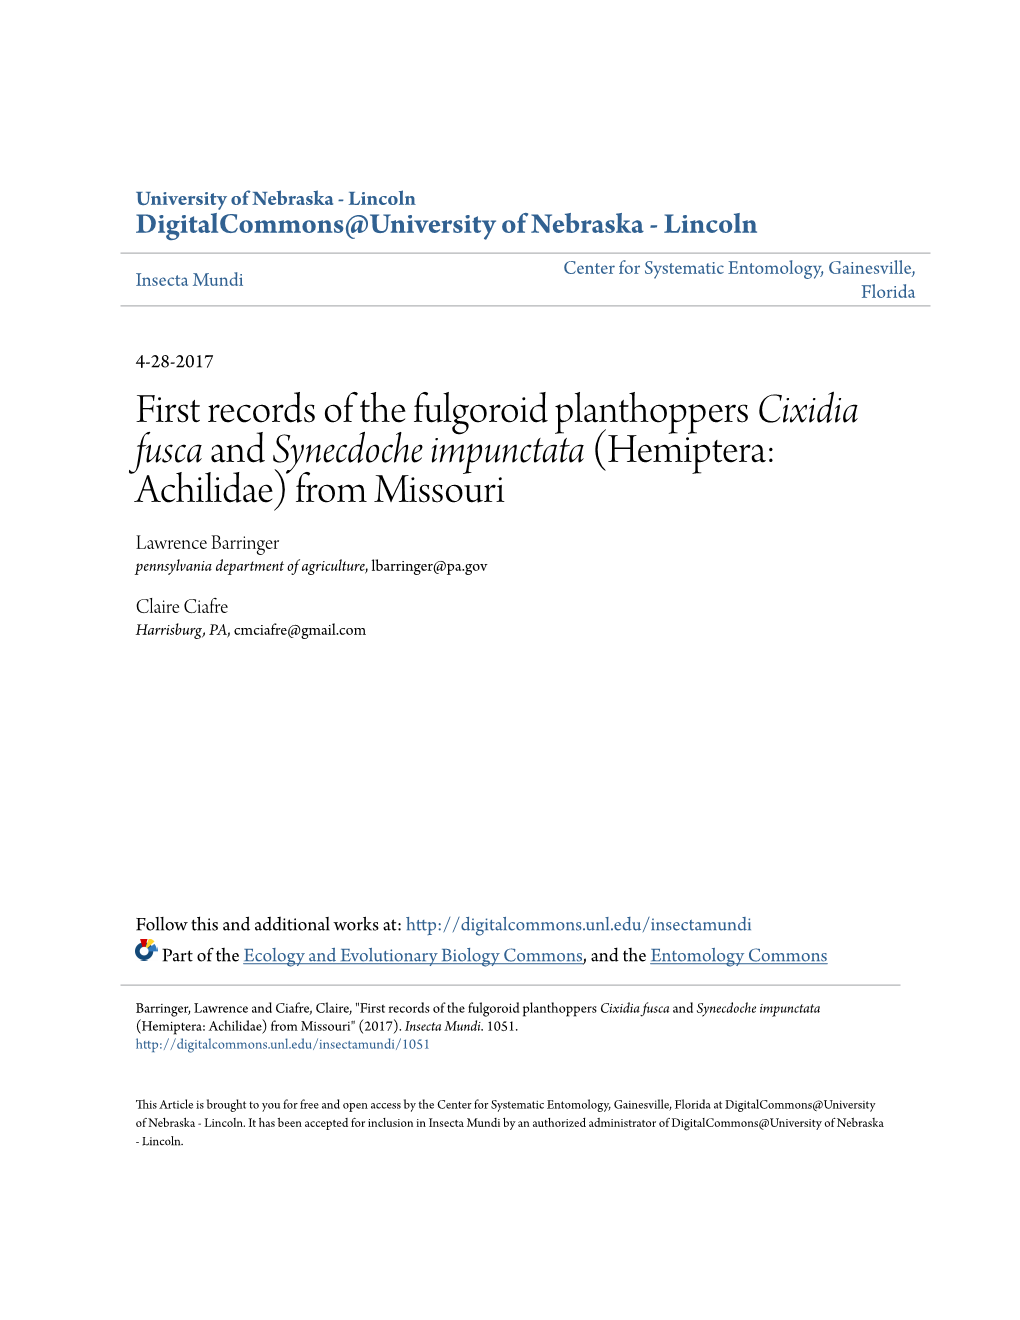 First Records of the Fulgoroid Planthoppers Cixidia Fusca And